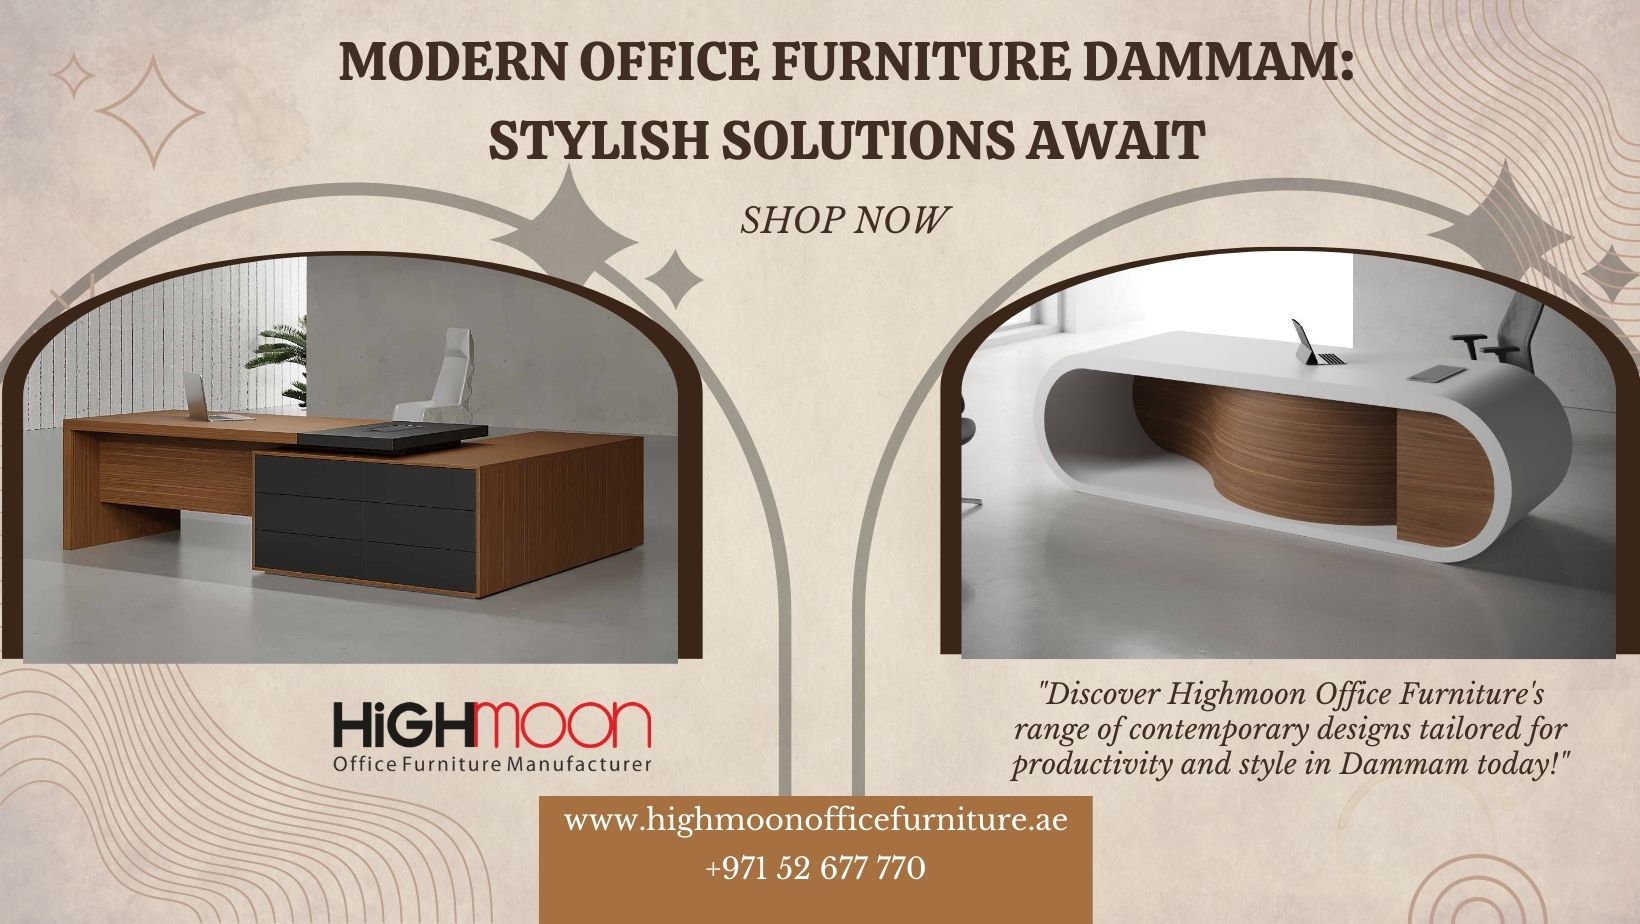 Modern Office Furniture Retailers in Dammam: stylish solutions